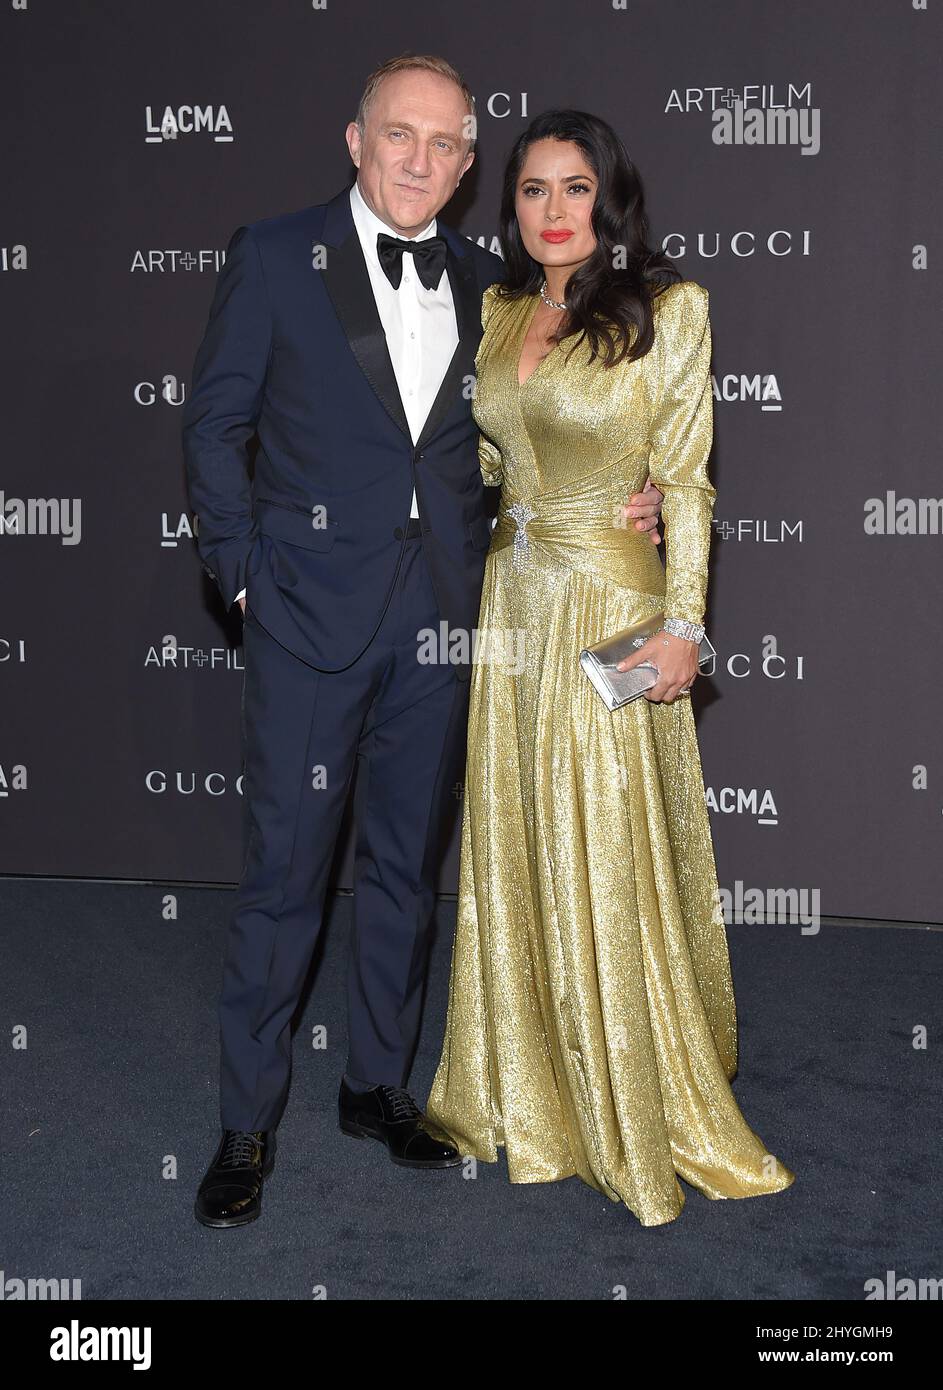 Francois-Henri Pinault and Salma Hayek attending the LACMA Alfonso Cuaron at LACMA Art + Film Gala 2018 honoring Catherine Opie and Guillermo del Toro held at LACMA in Los Angeles, California Stock Photo